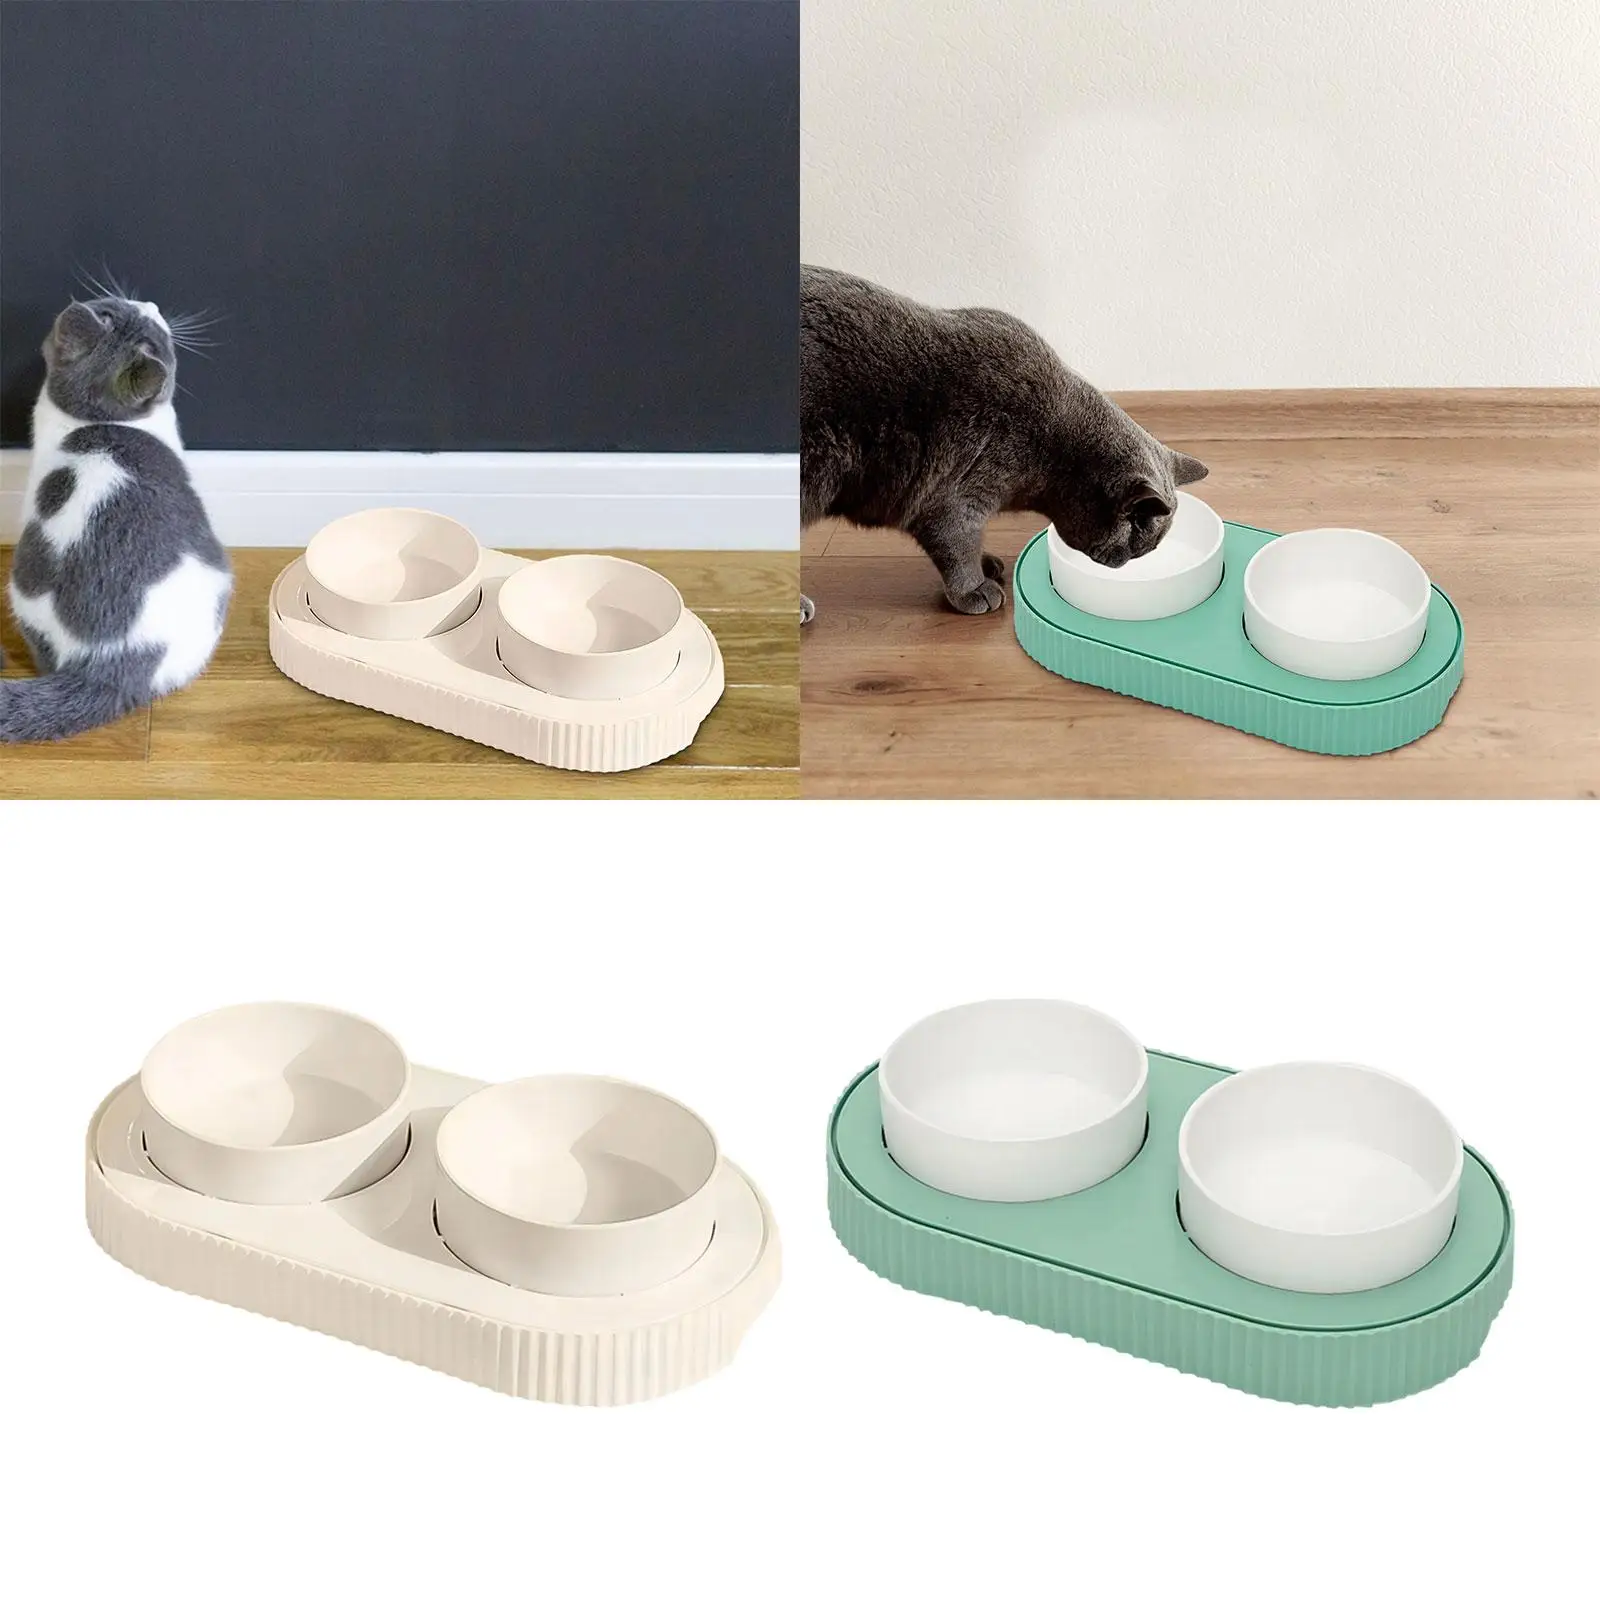 Double Pet Food Bowl Cat Feeder Easy to Clean Cats Food and Water Bowl Set